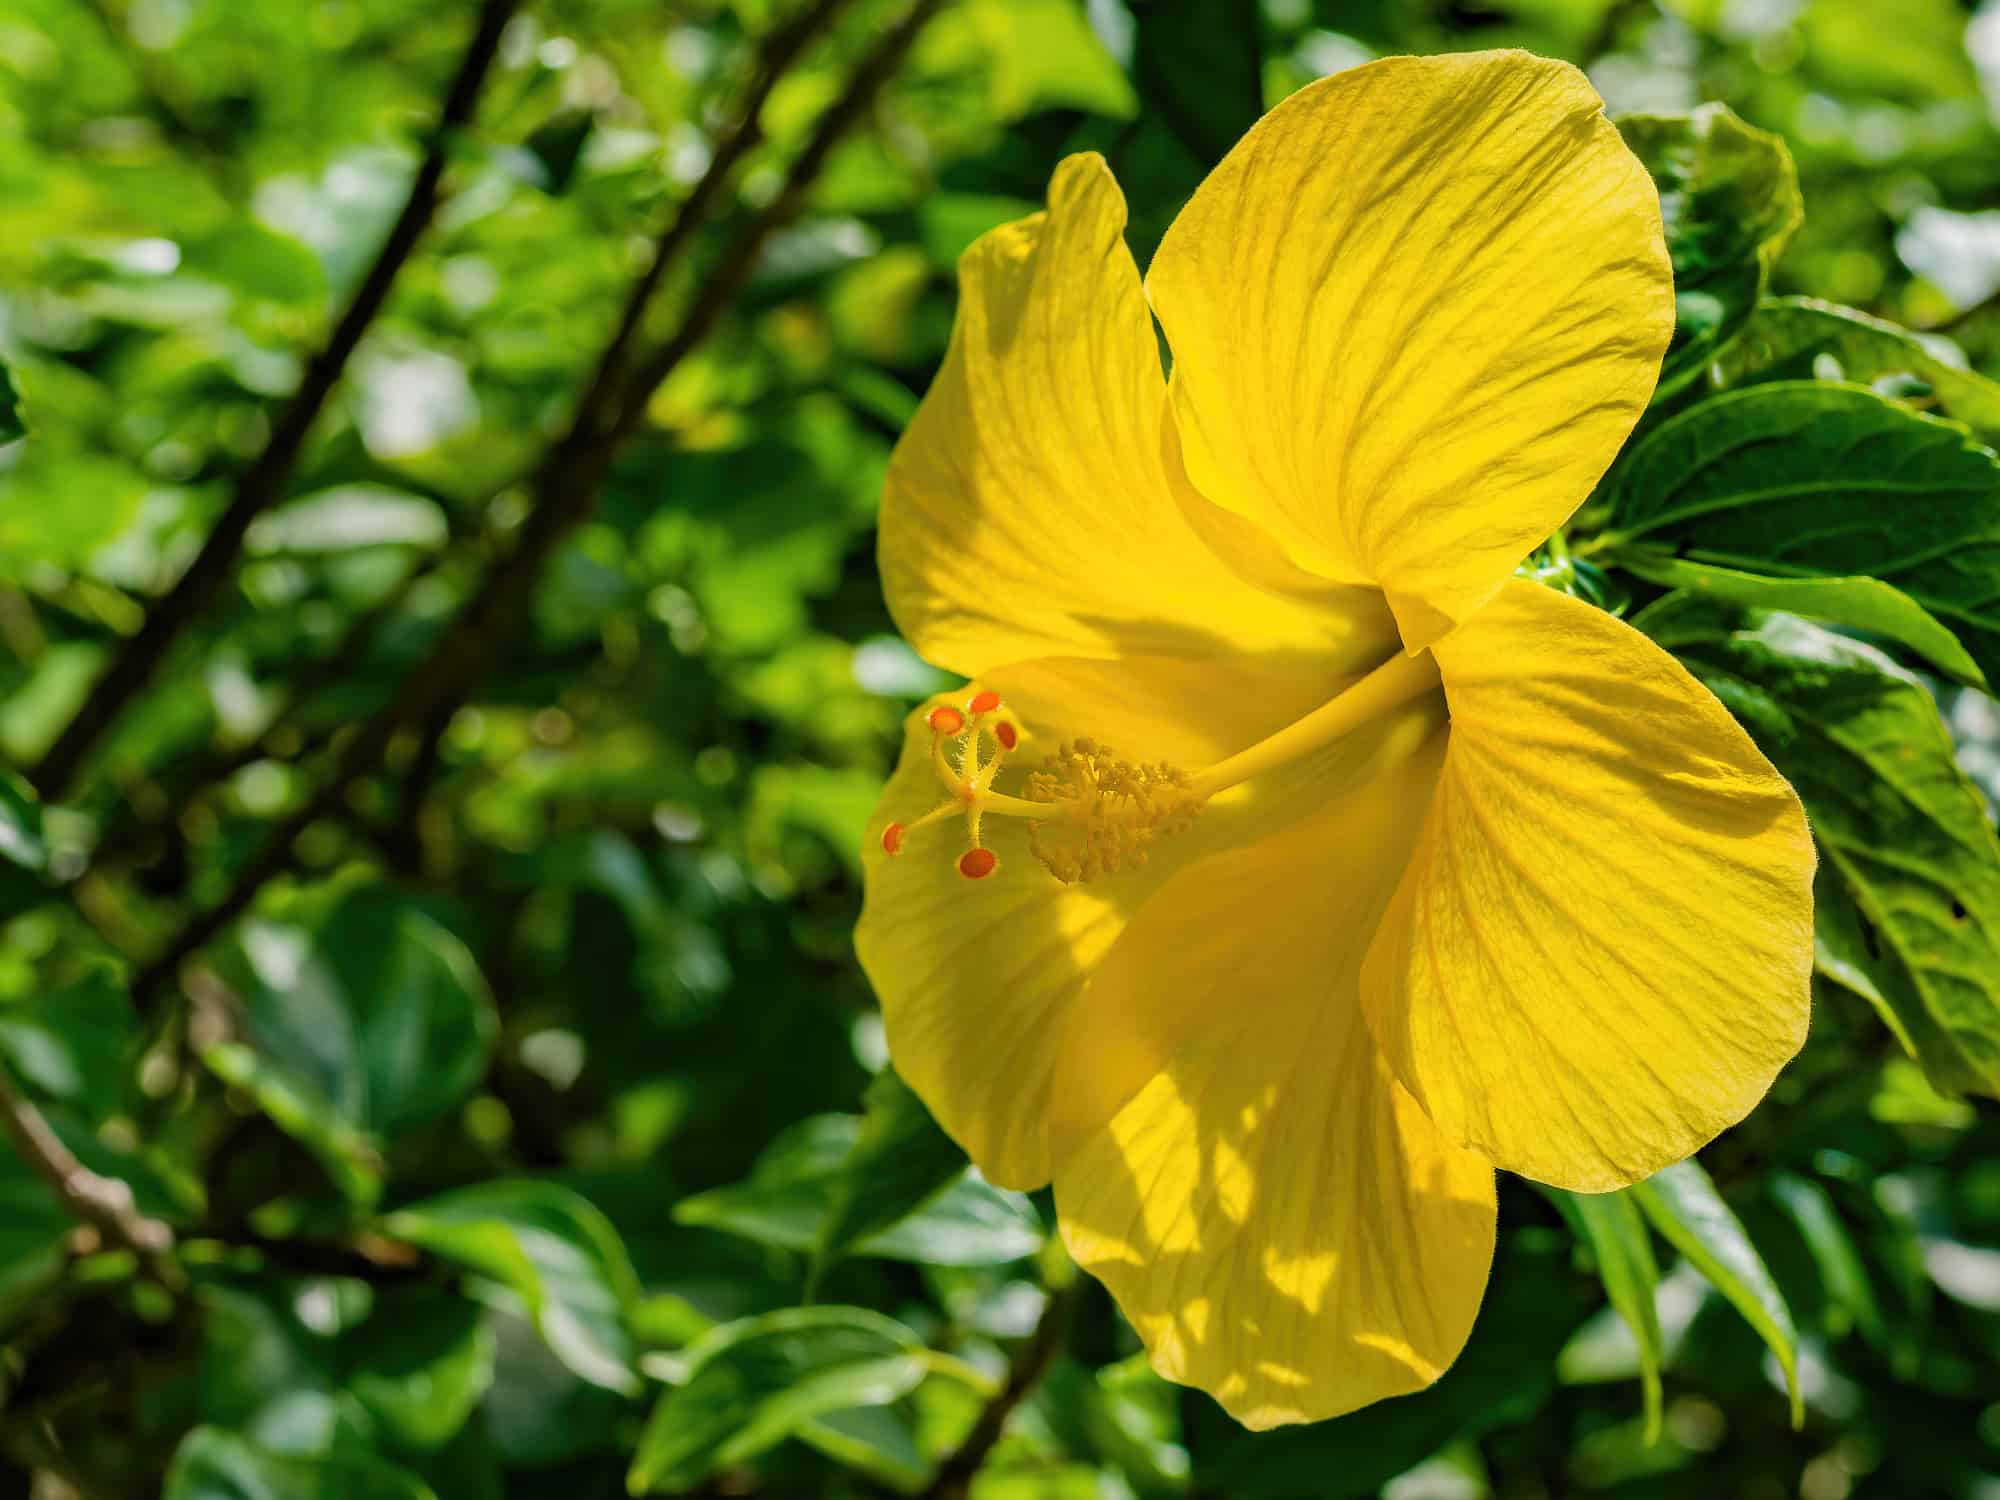 yellow hibiscus Tropical Hibiscus Pink hibiscus petal layers tropical plants online plant shop buy plants online colorful flowers tropical flowers Hibiscus bush hibiscus tree Yoder hibiscus Yellow Tropical Hibiscus Hibiscus Hibiscus tree tropical hibiscus tree Hibiscus bush Tropical hibiscus bush yoder hibiscus yoder dwarf hibiscus Dwarf tropical hibiscus Tropical plants tropical flowers colorful flowers pet friendly plants pollinator friendly plants Live plants shop live plants online plant shop